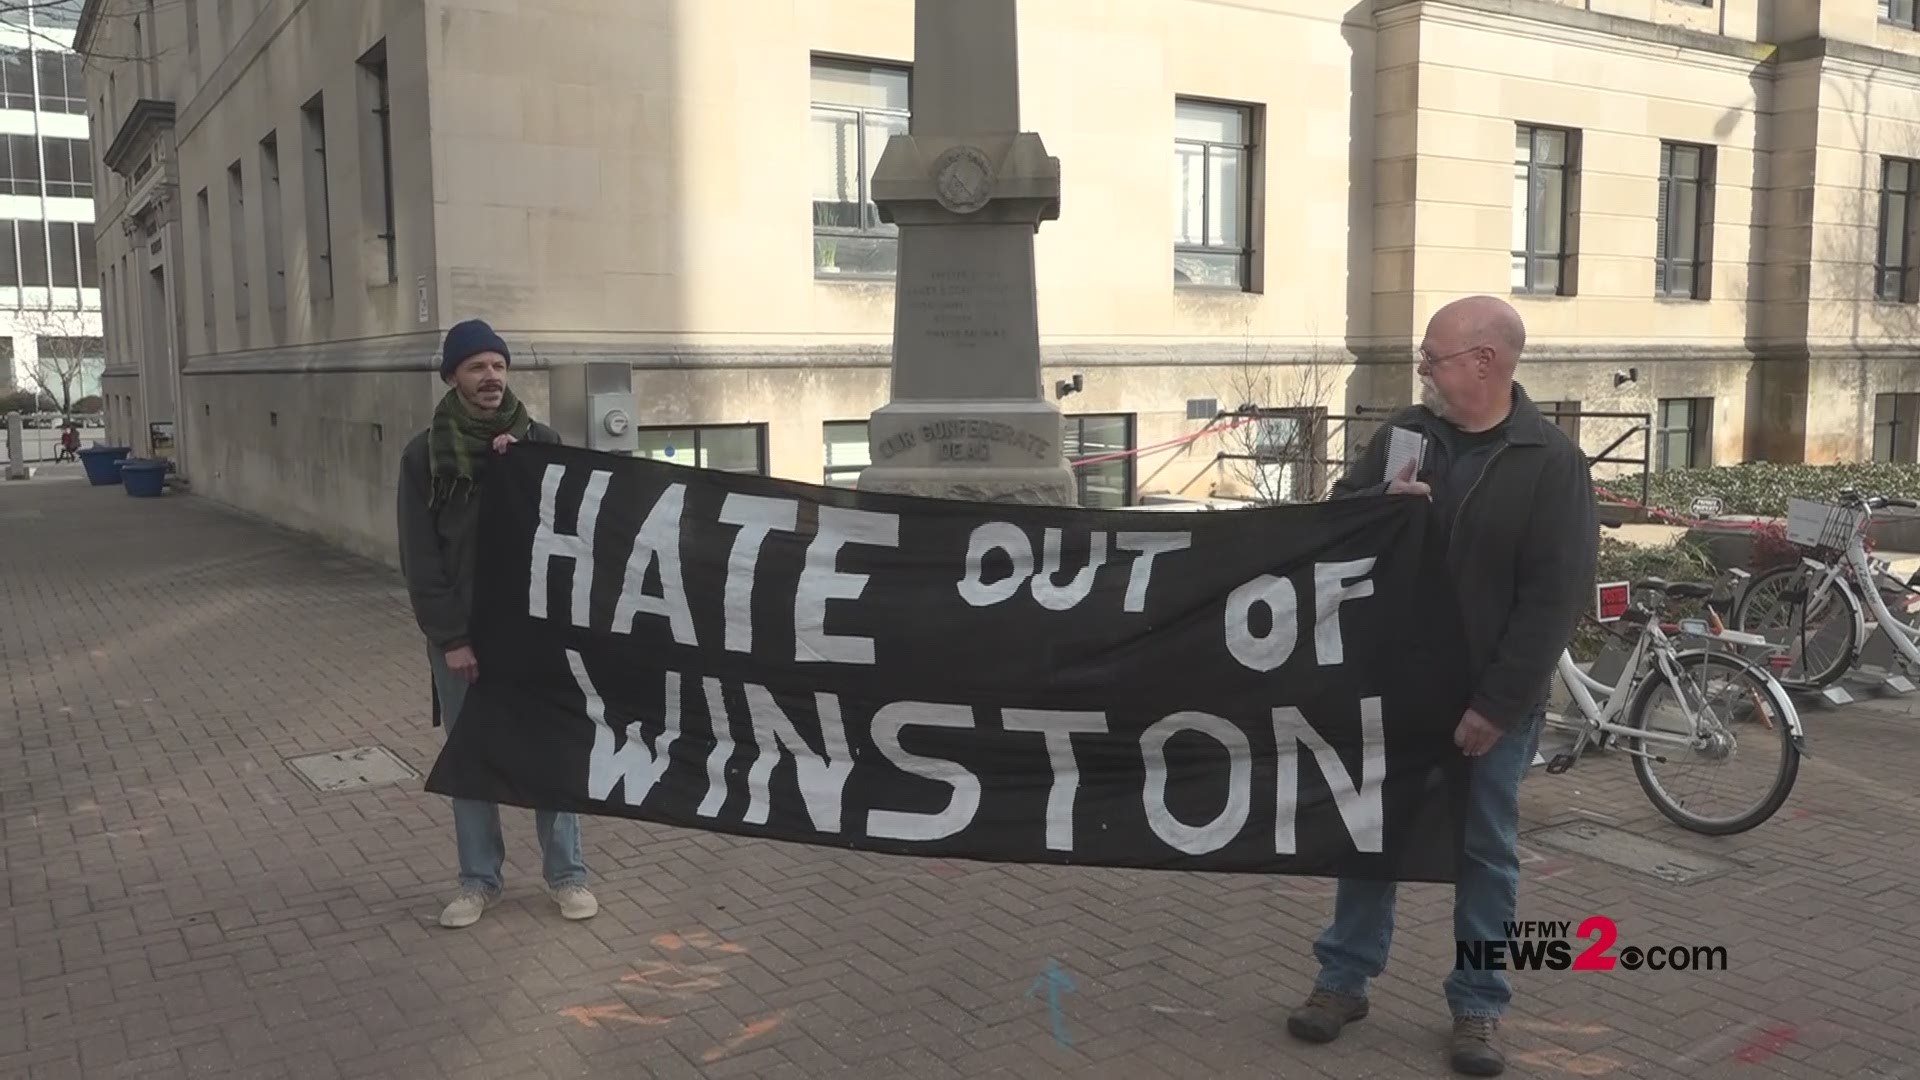 Protesters gathered once again in Downtown Winston-Salem over the removal of a confederate monument. The group "Hate Out of Winston" said they want to hold city leaders accountable for the removal after the deadline. The other group were statue supporters protesting the removal of what they say is a piece of American history.